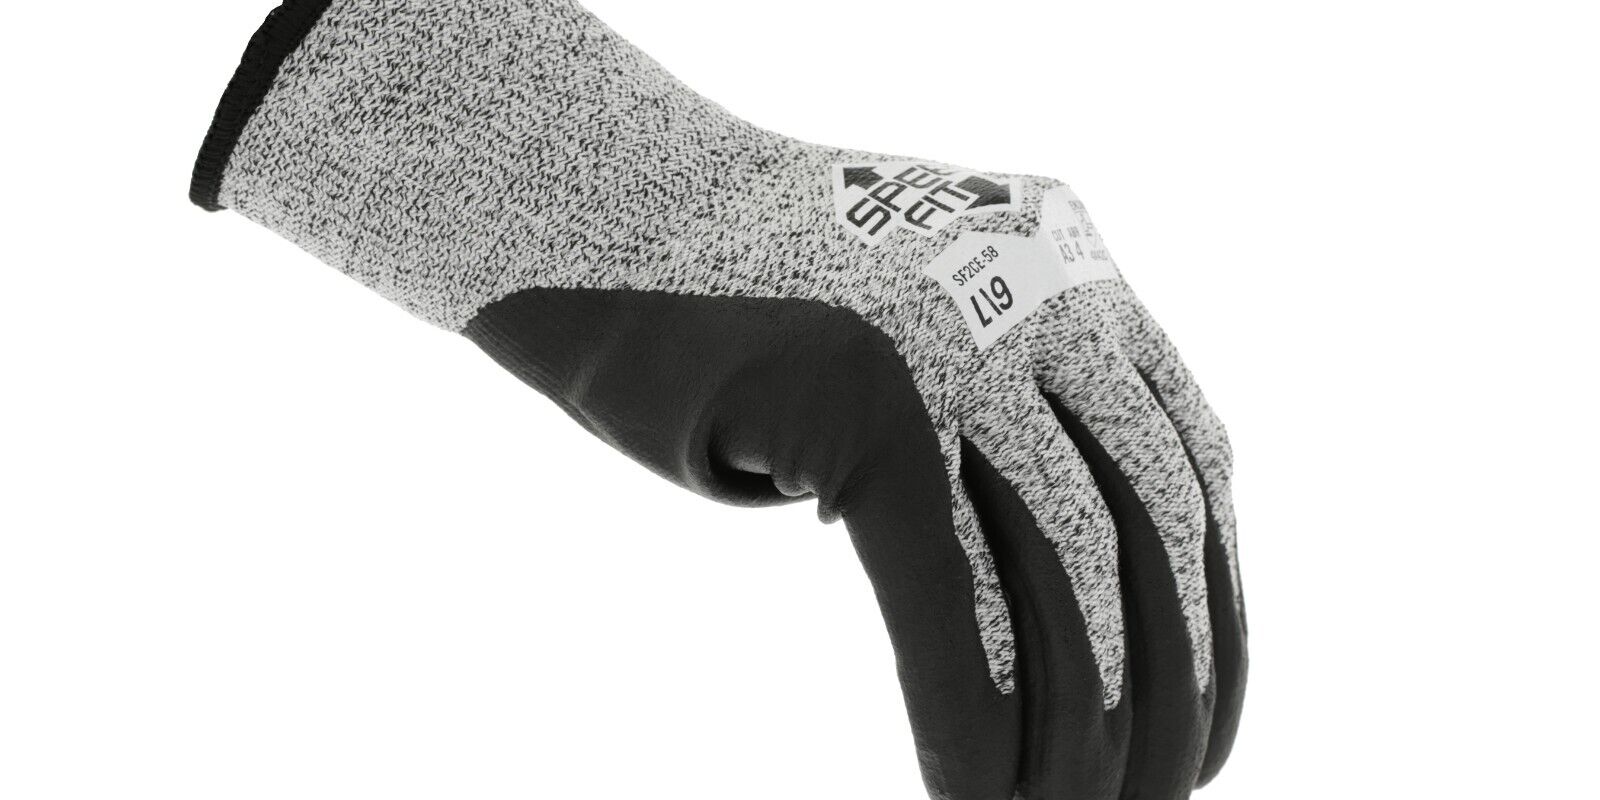 Mechanix Wear Nitrile coated Cut-resistant gloves, Grey, 8.19 inch long, 13 Ga thick, HPPE/Nylon, 12 Pair in a pack (SM, MD, L, XL, XXL)